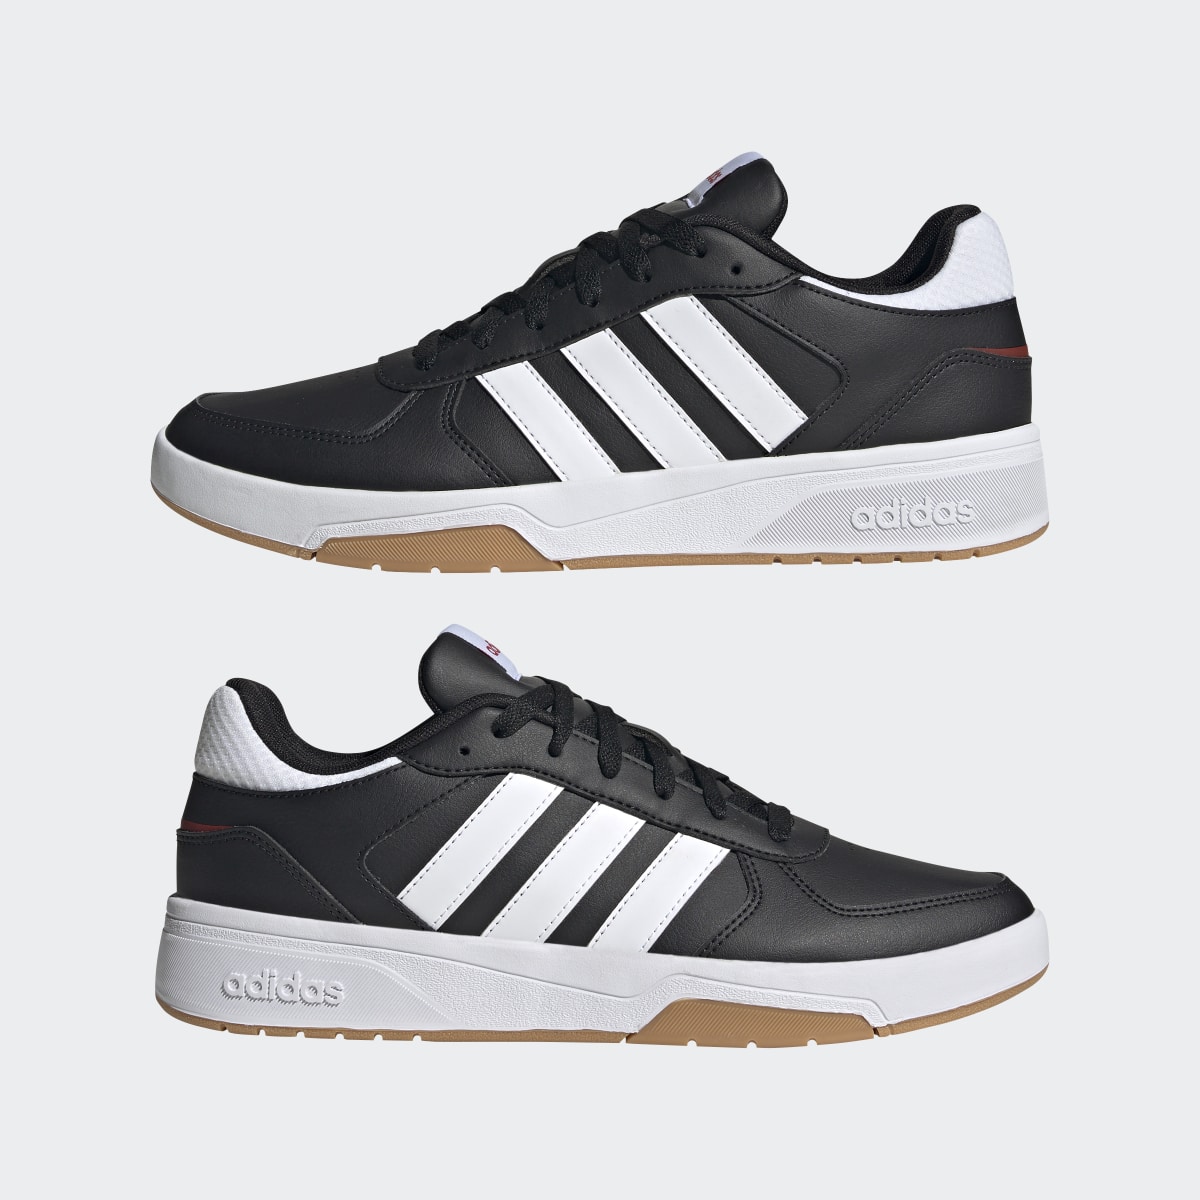 Adidas Chaussure CourtBeat Court Lifestyle. 11